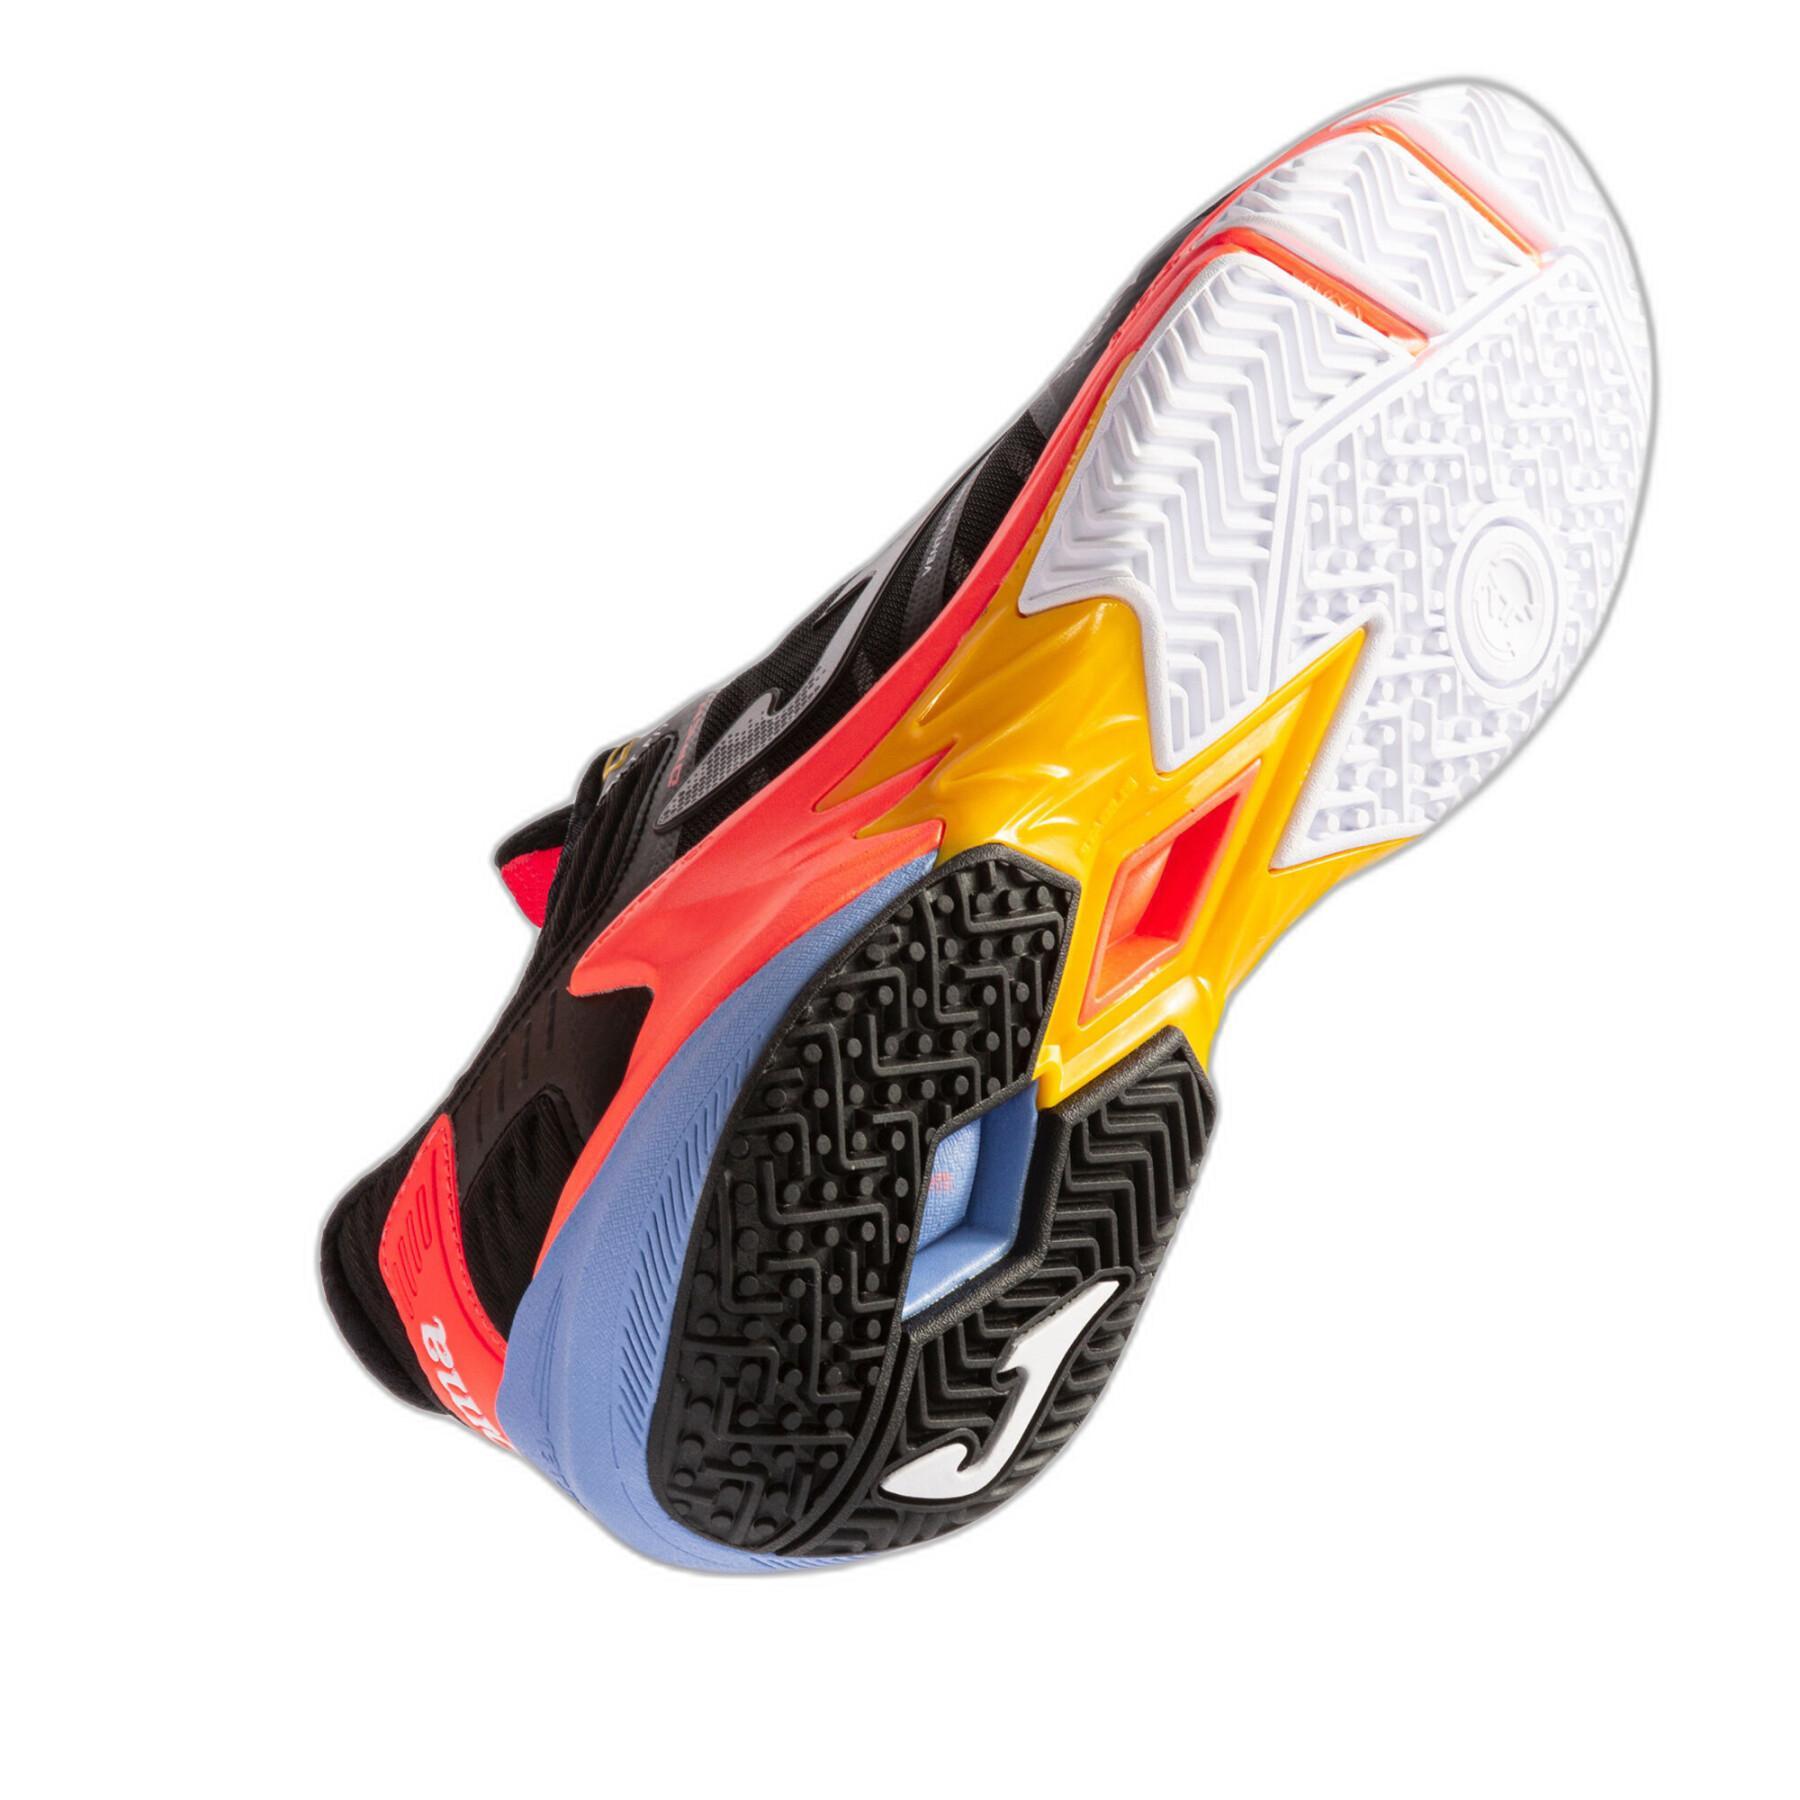 Paddle shoes Joma T.Open